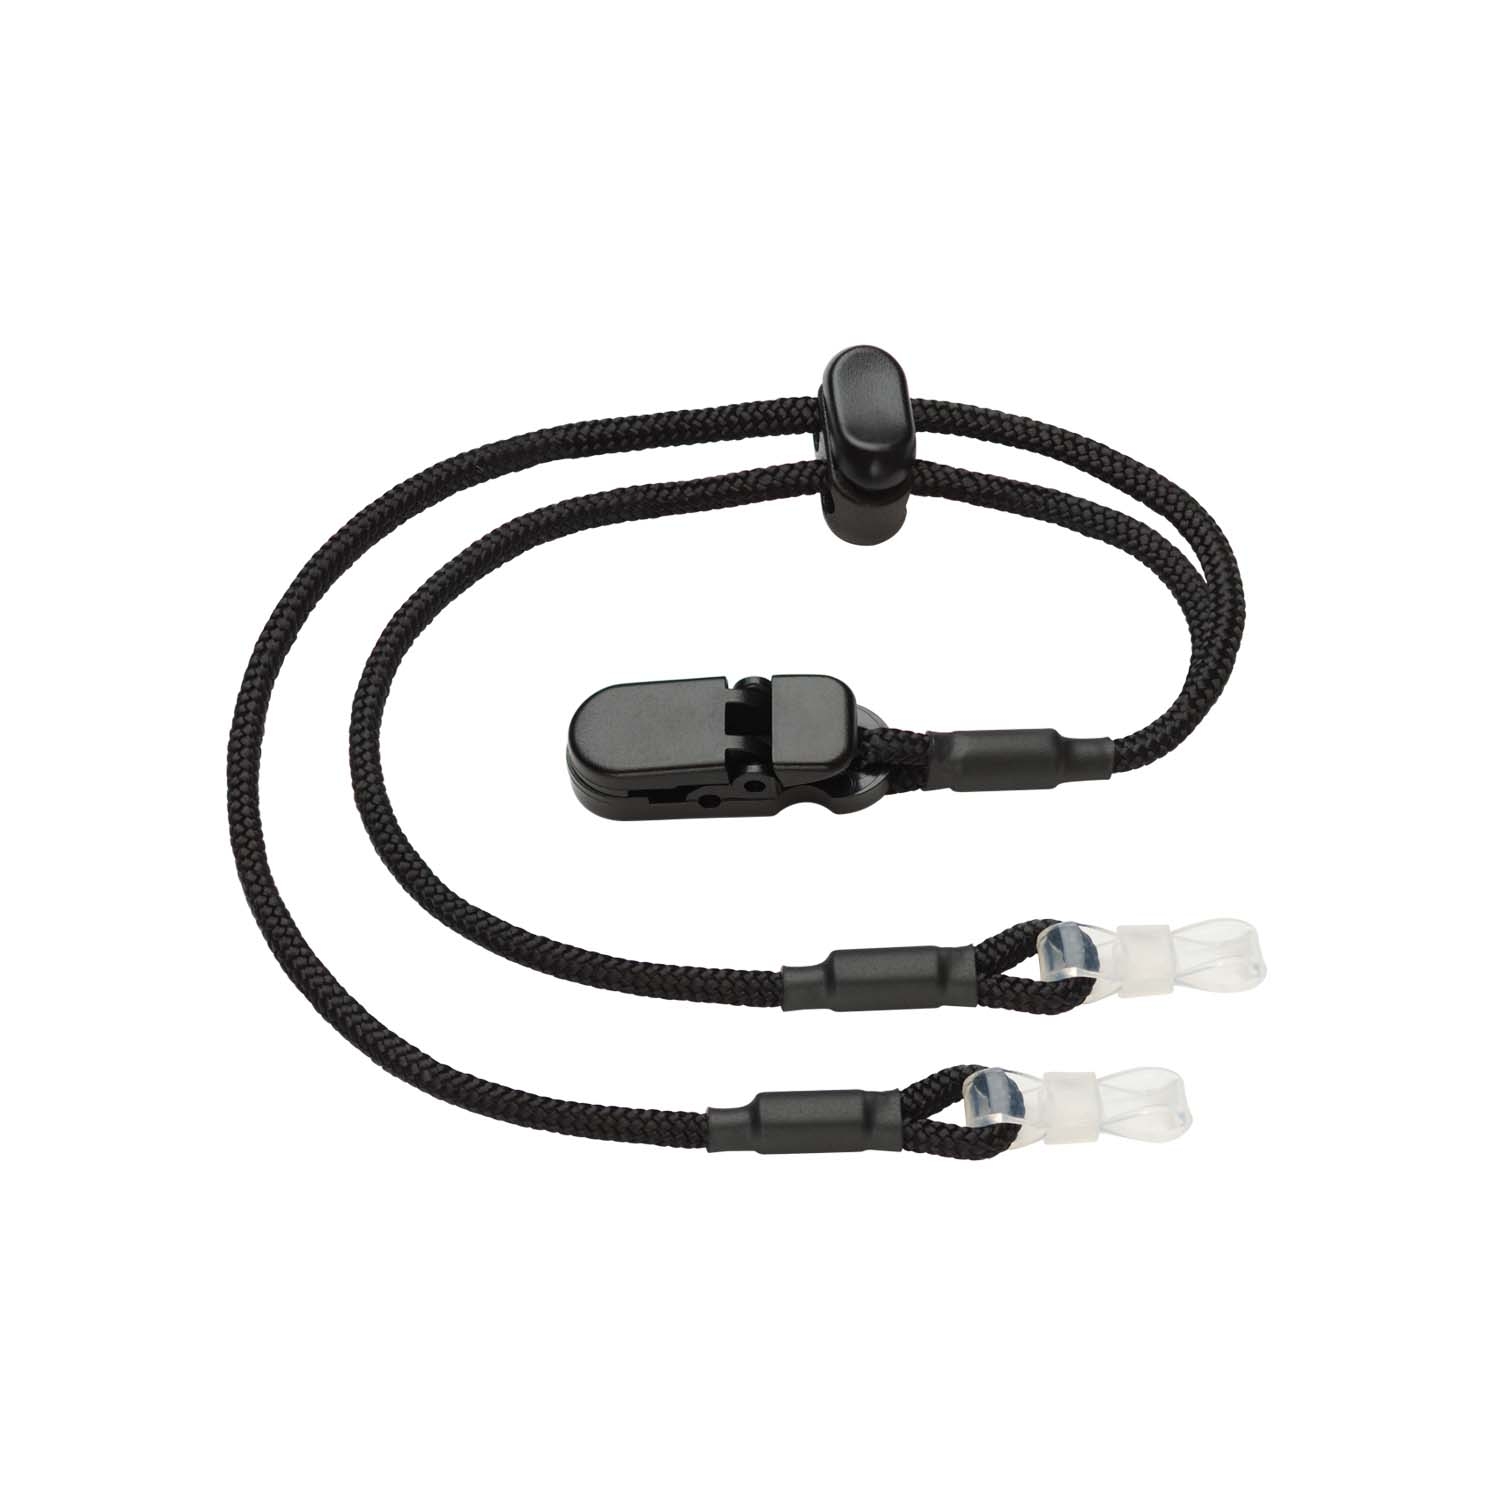 https://www.cochlear.com/on/demandware.static/-/Sites-cochlear-master-catalog/default/dwce729175/hi-res/P778827_Safety%20Cord_Bilateral.jpg